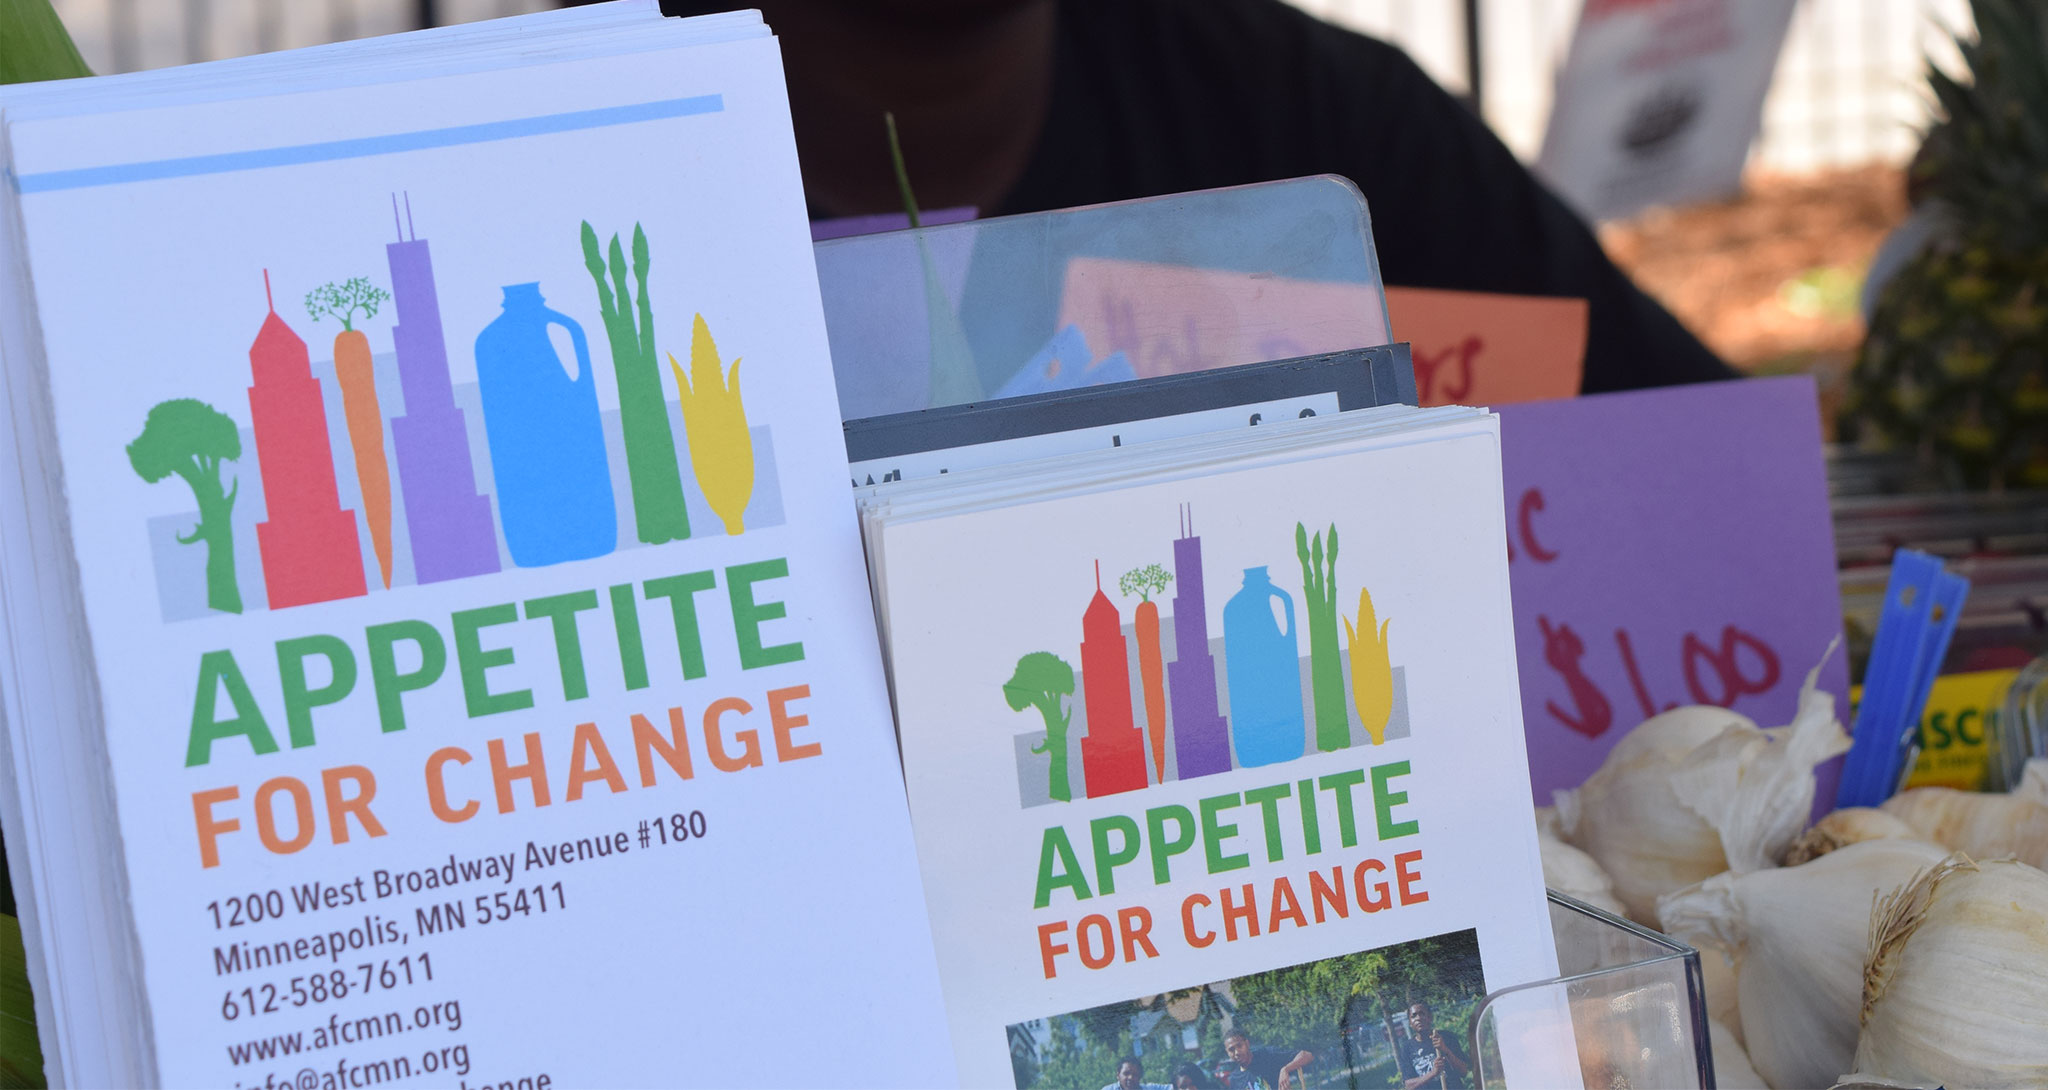 Appetite for change signs at the farmers market